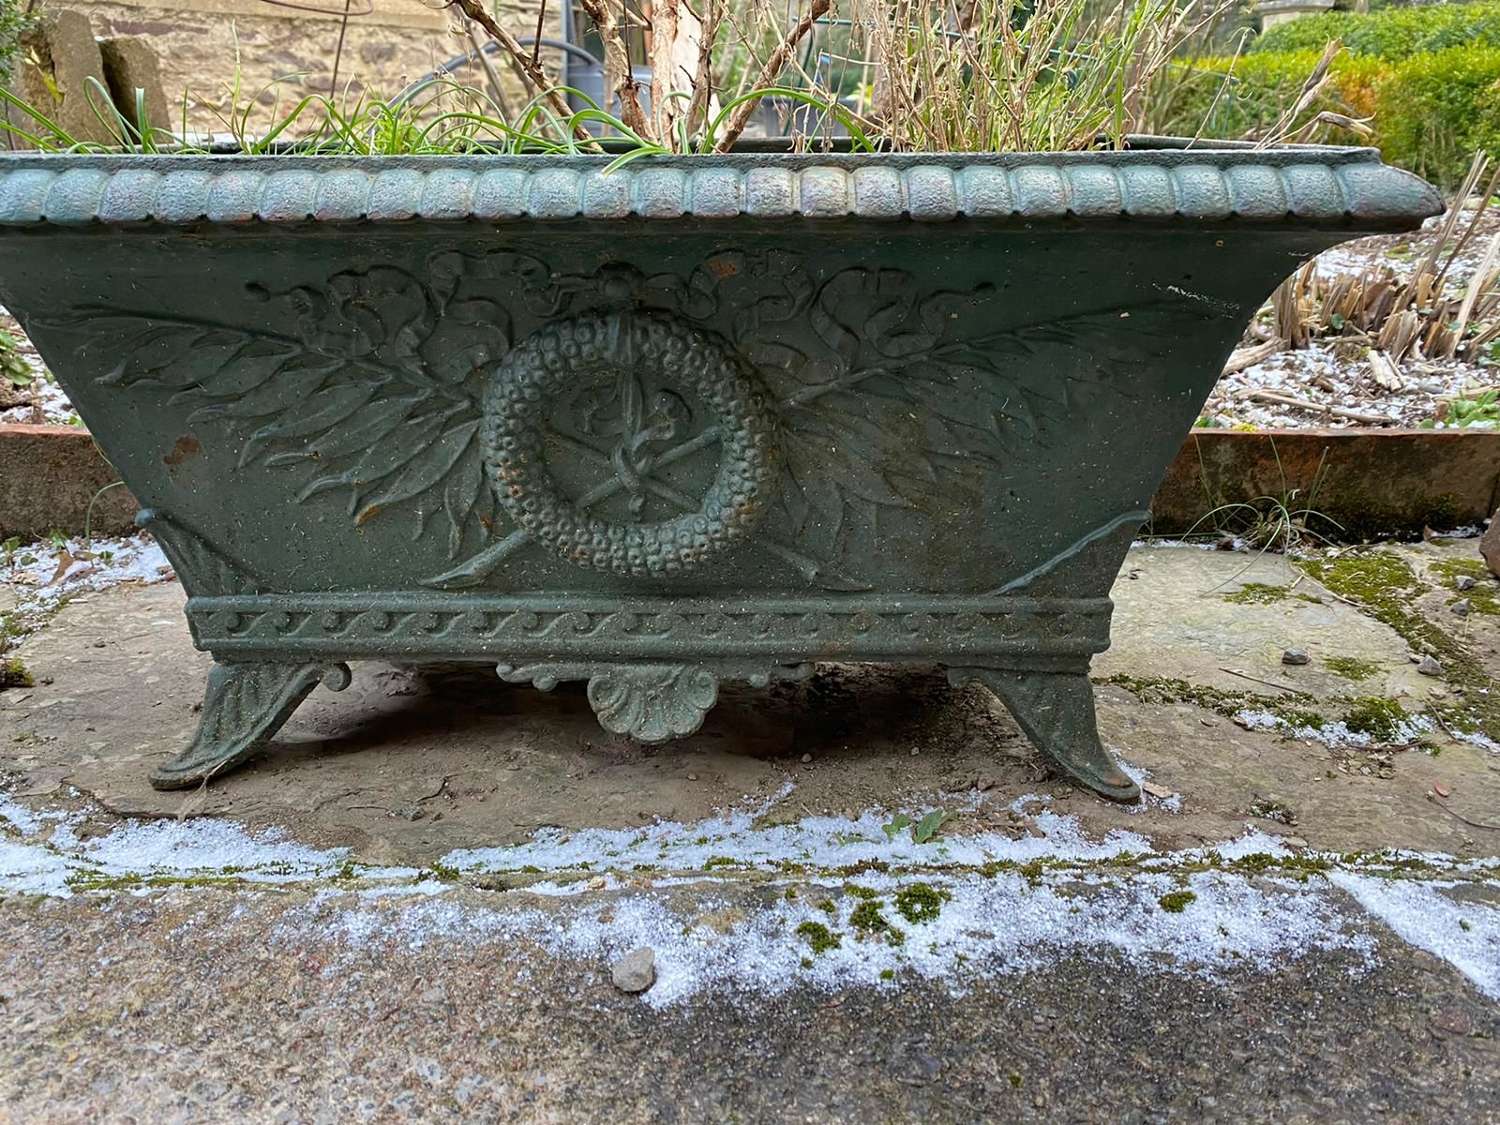 Napoleon the third cast iron planter in the Regency style